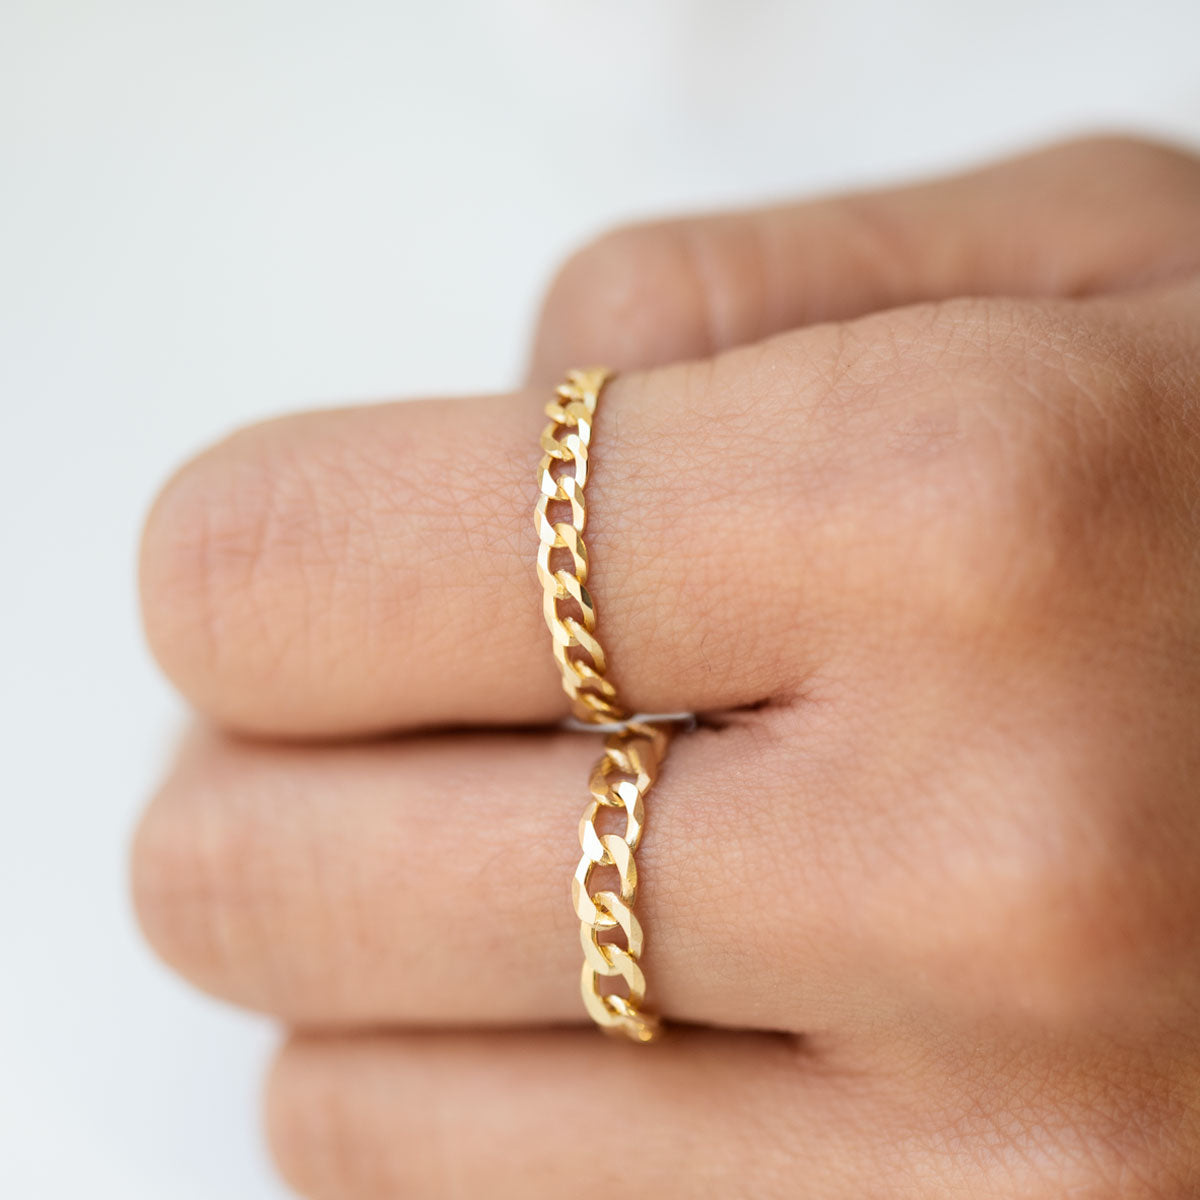 Gold Curb Chain Rings worn on Index and Middle Finger